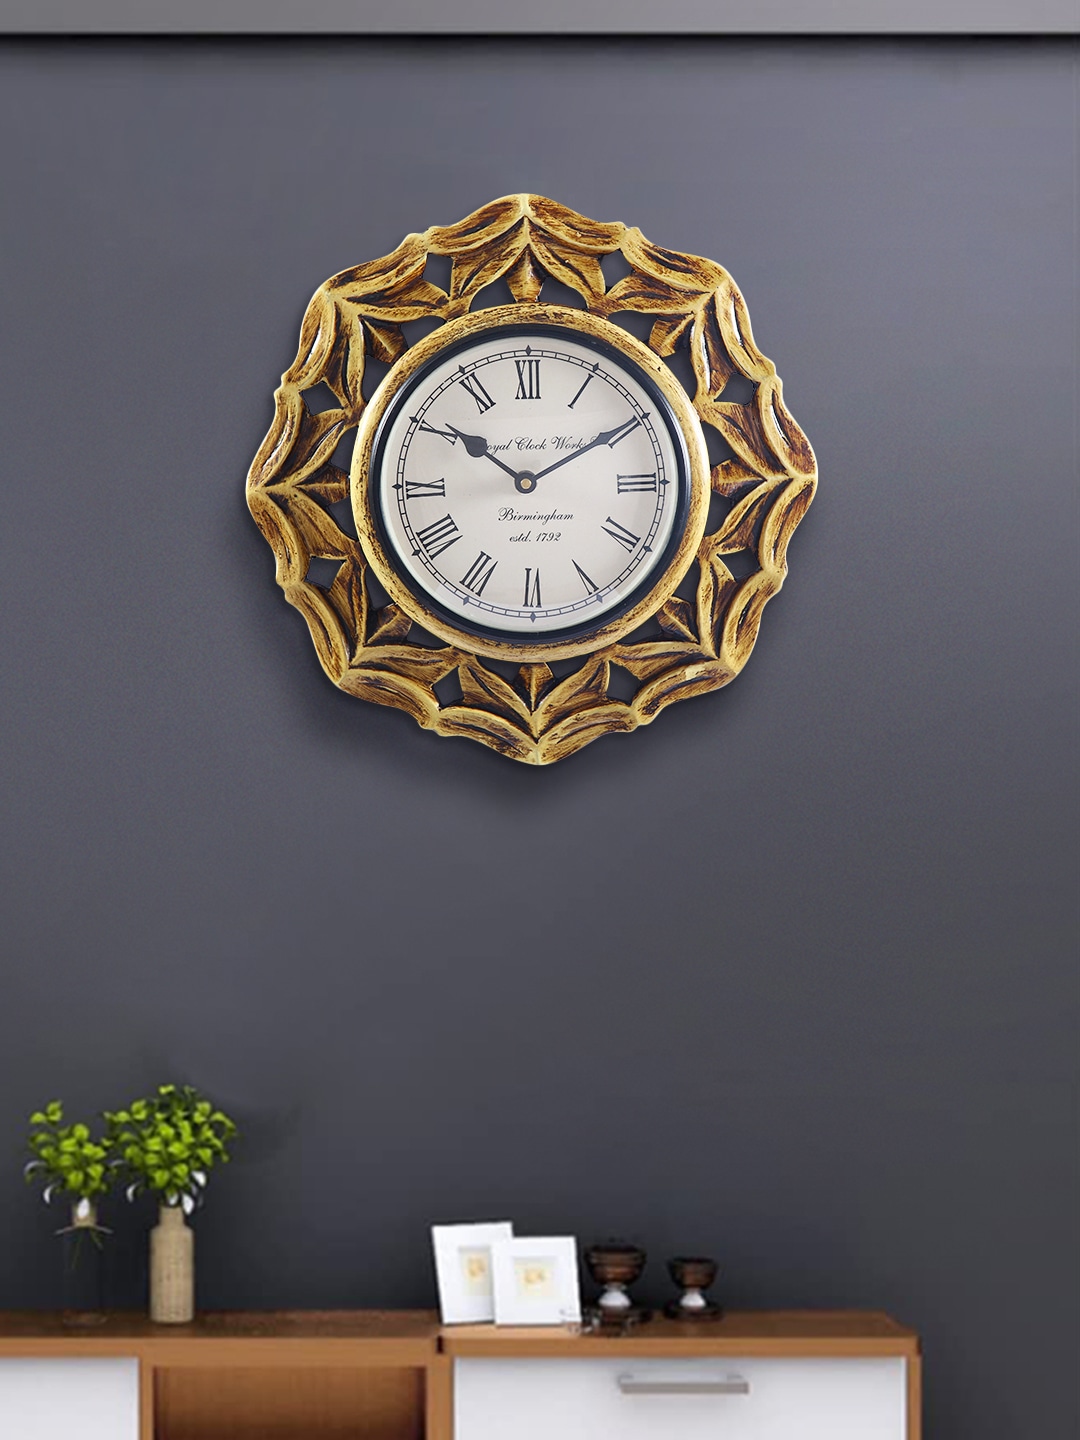 Aapno Rajasthan Brown & Mustard Floral Contemporary Handcrafted Analogue Wall Clock Price in India